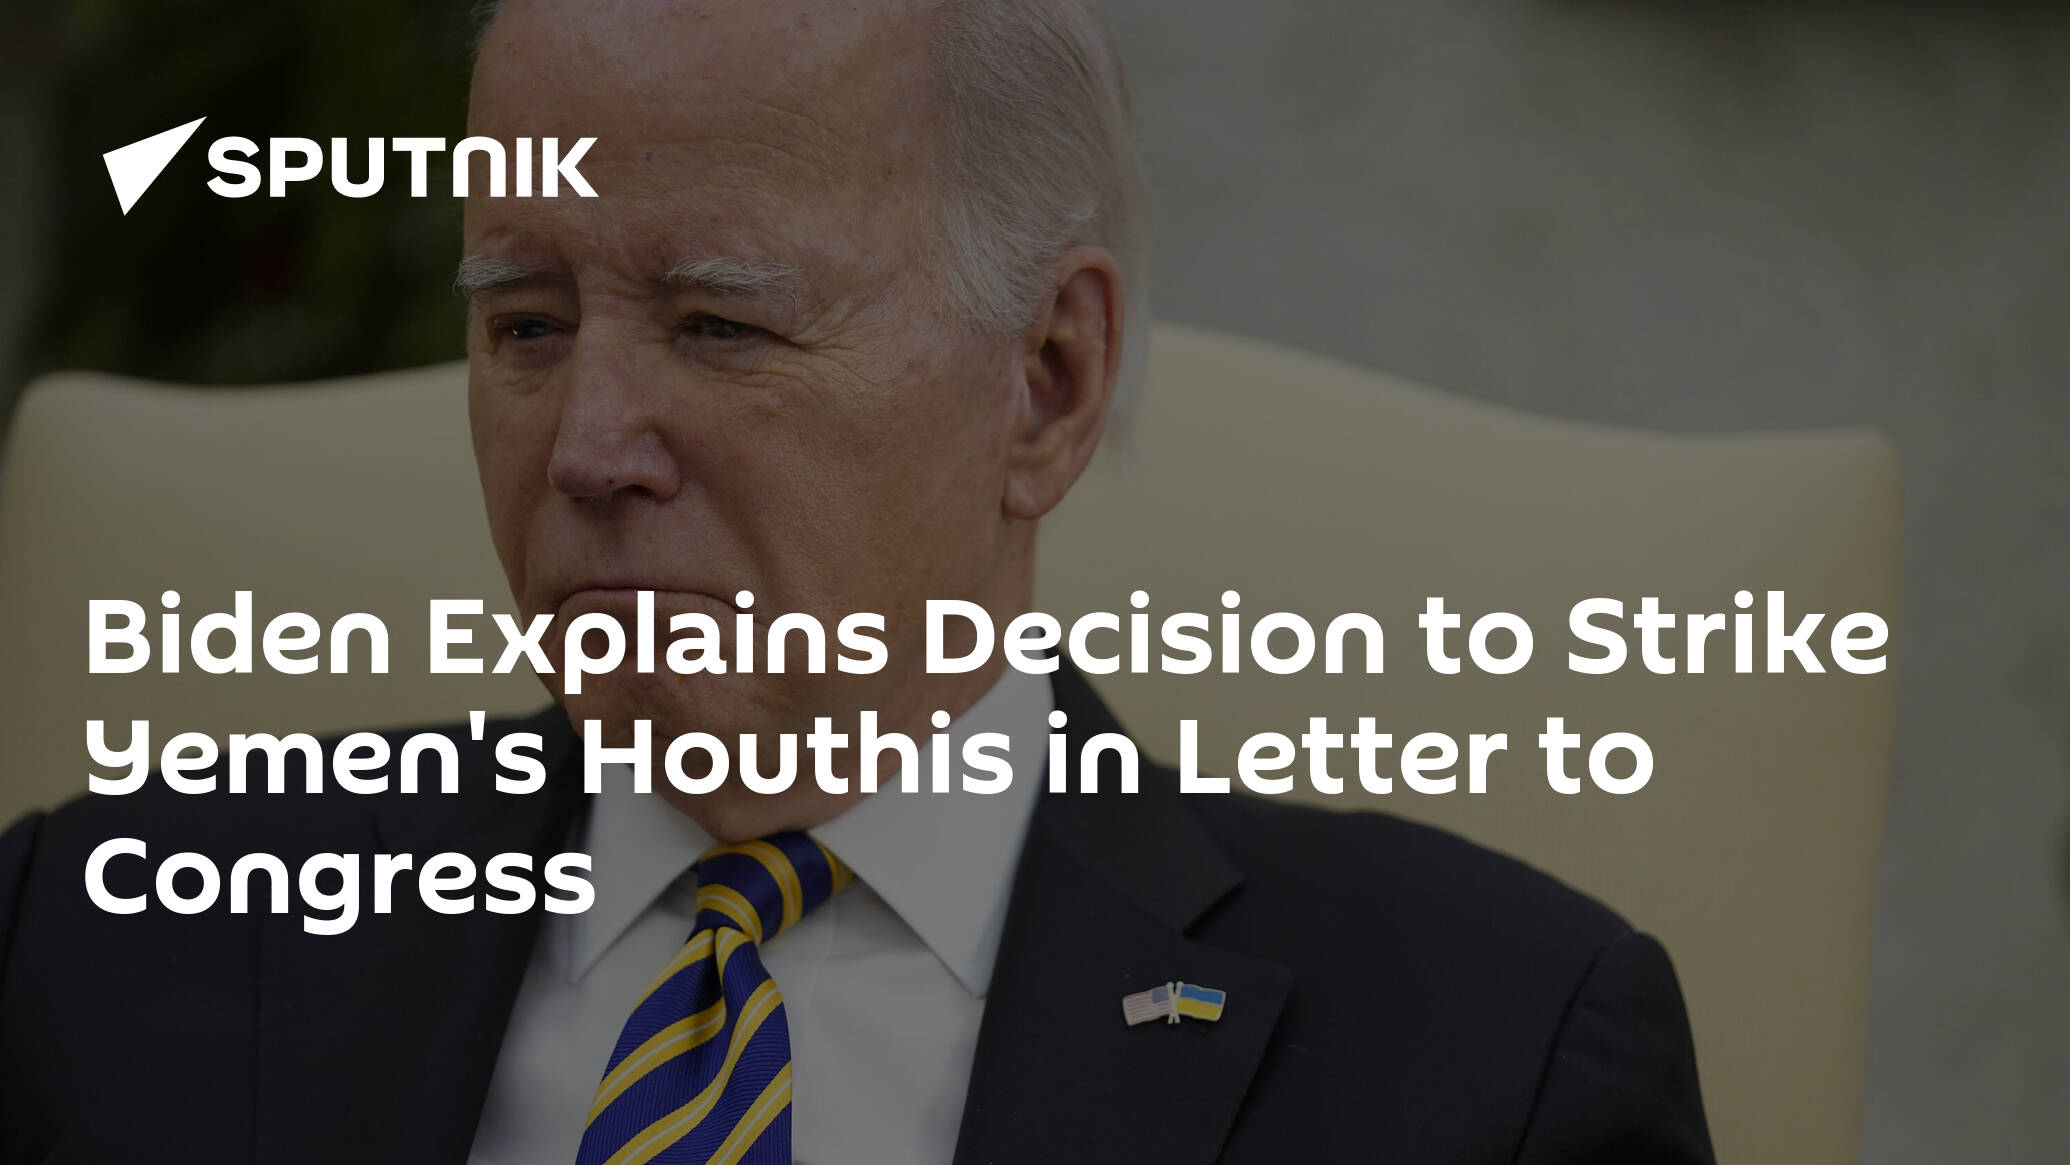 Biden in Letter to Congress Explains His Decision to Strike Yemen's Houthis